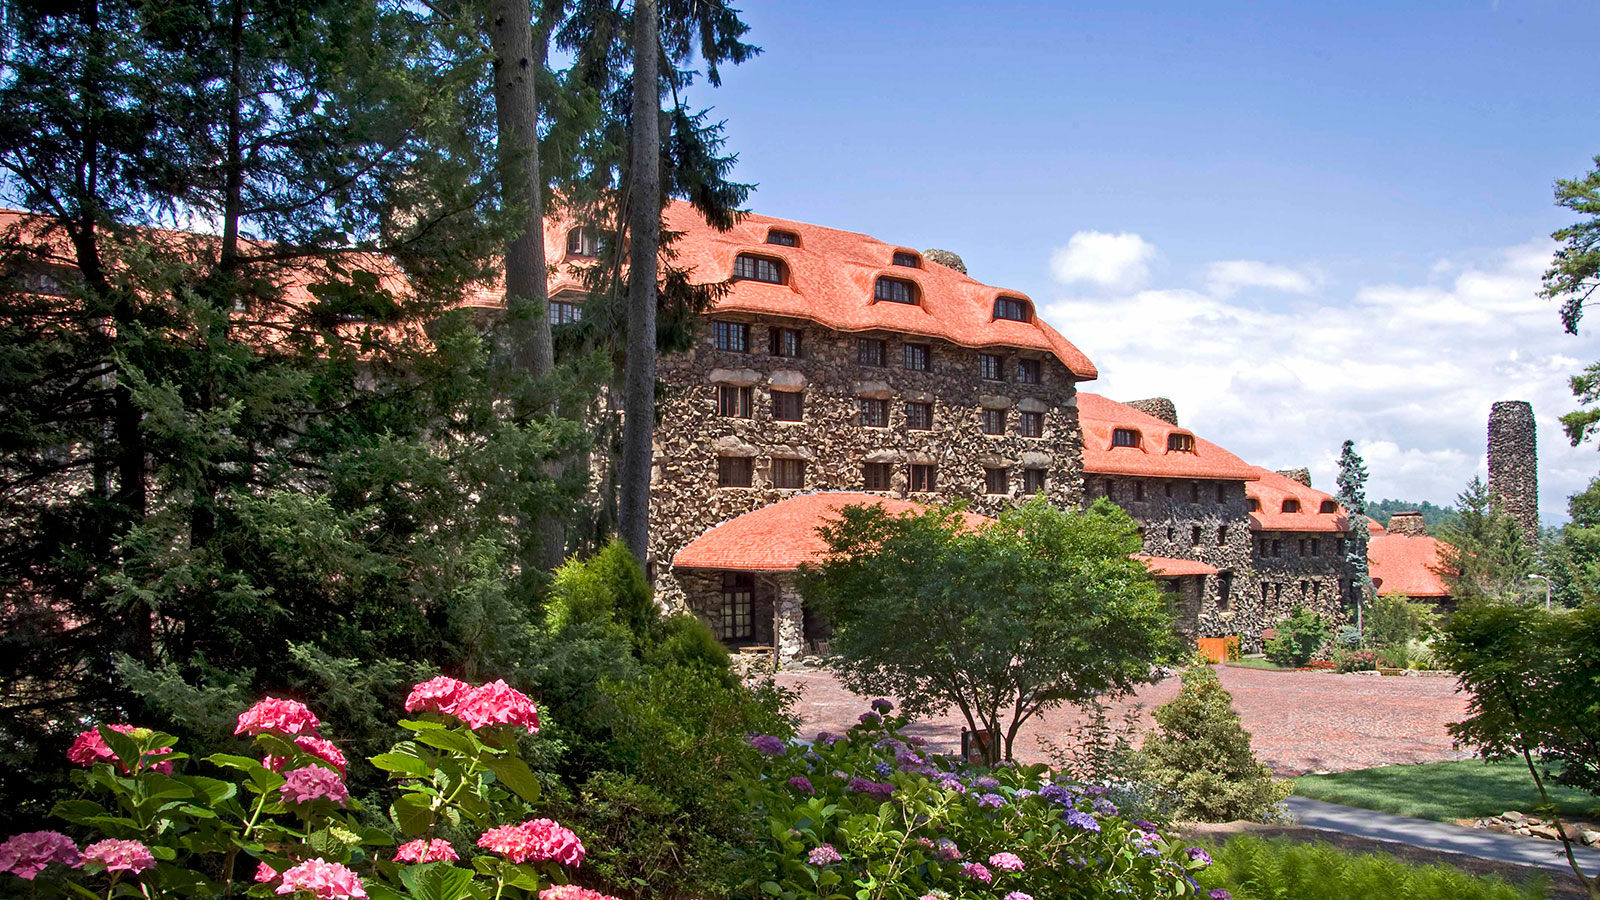 Image of Hotel Exterior The Omni Grove Park Inn, 1913, Member of Historic Hotels of America, in Asheville, North Carolina, Overview